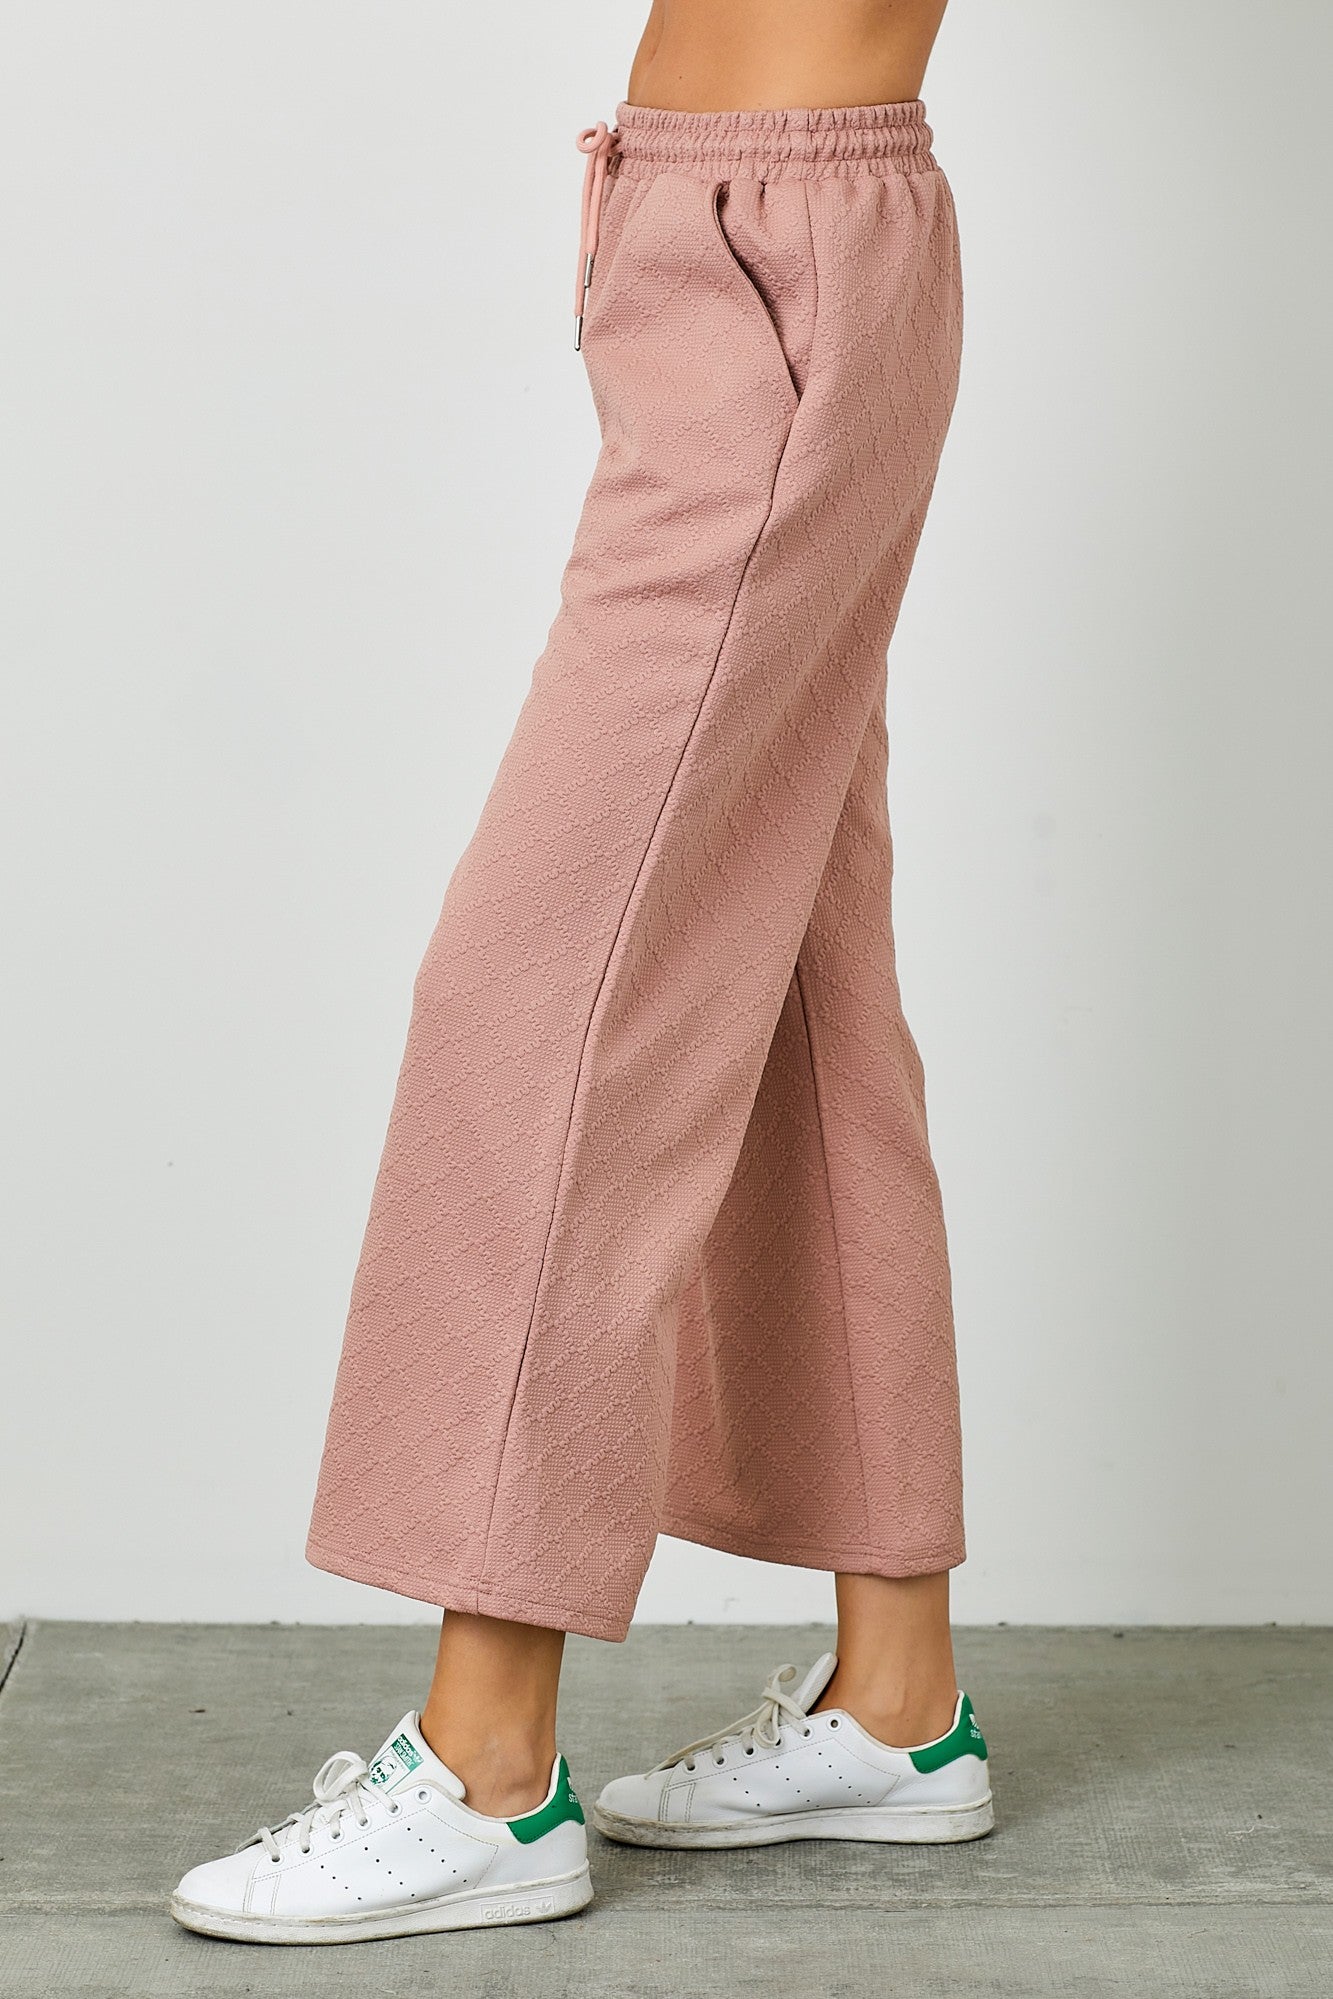 Textured Knit 2 Piece Lounge Set in Dusty Rose